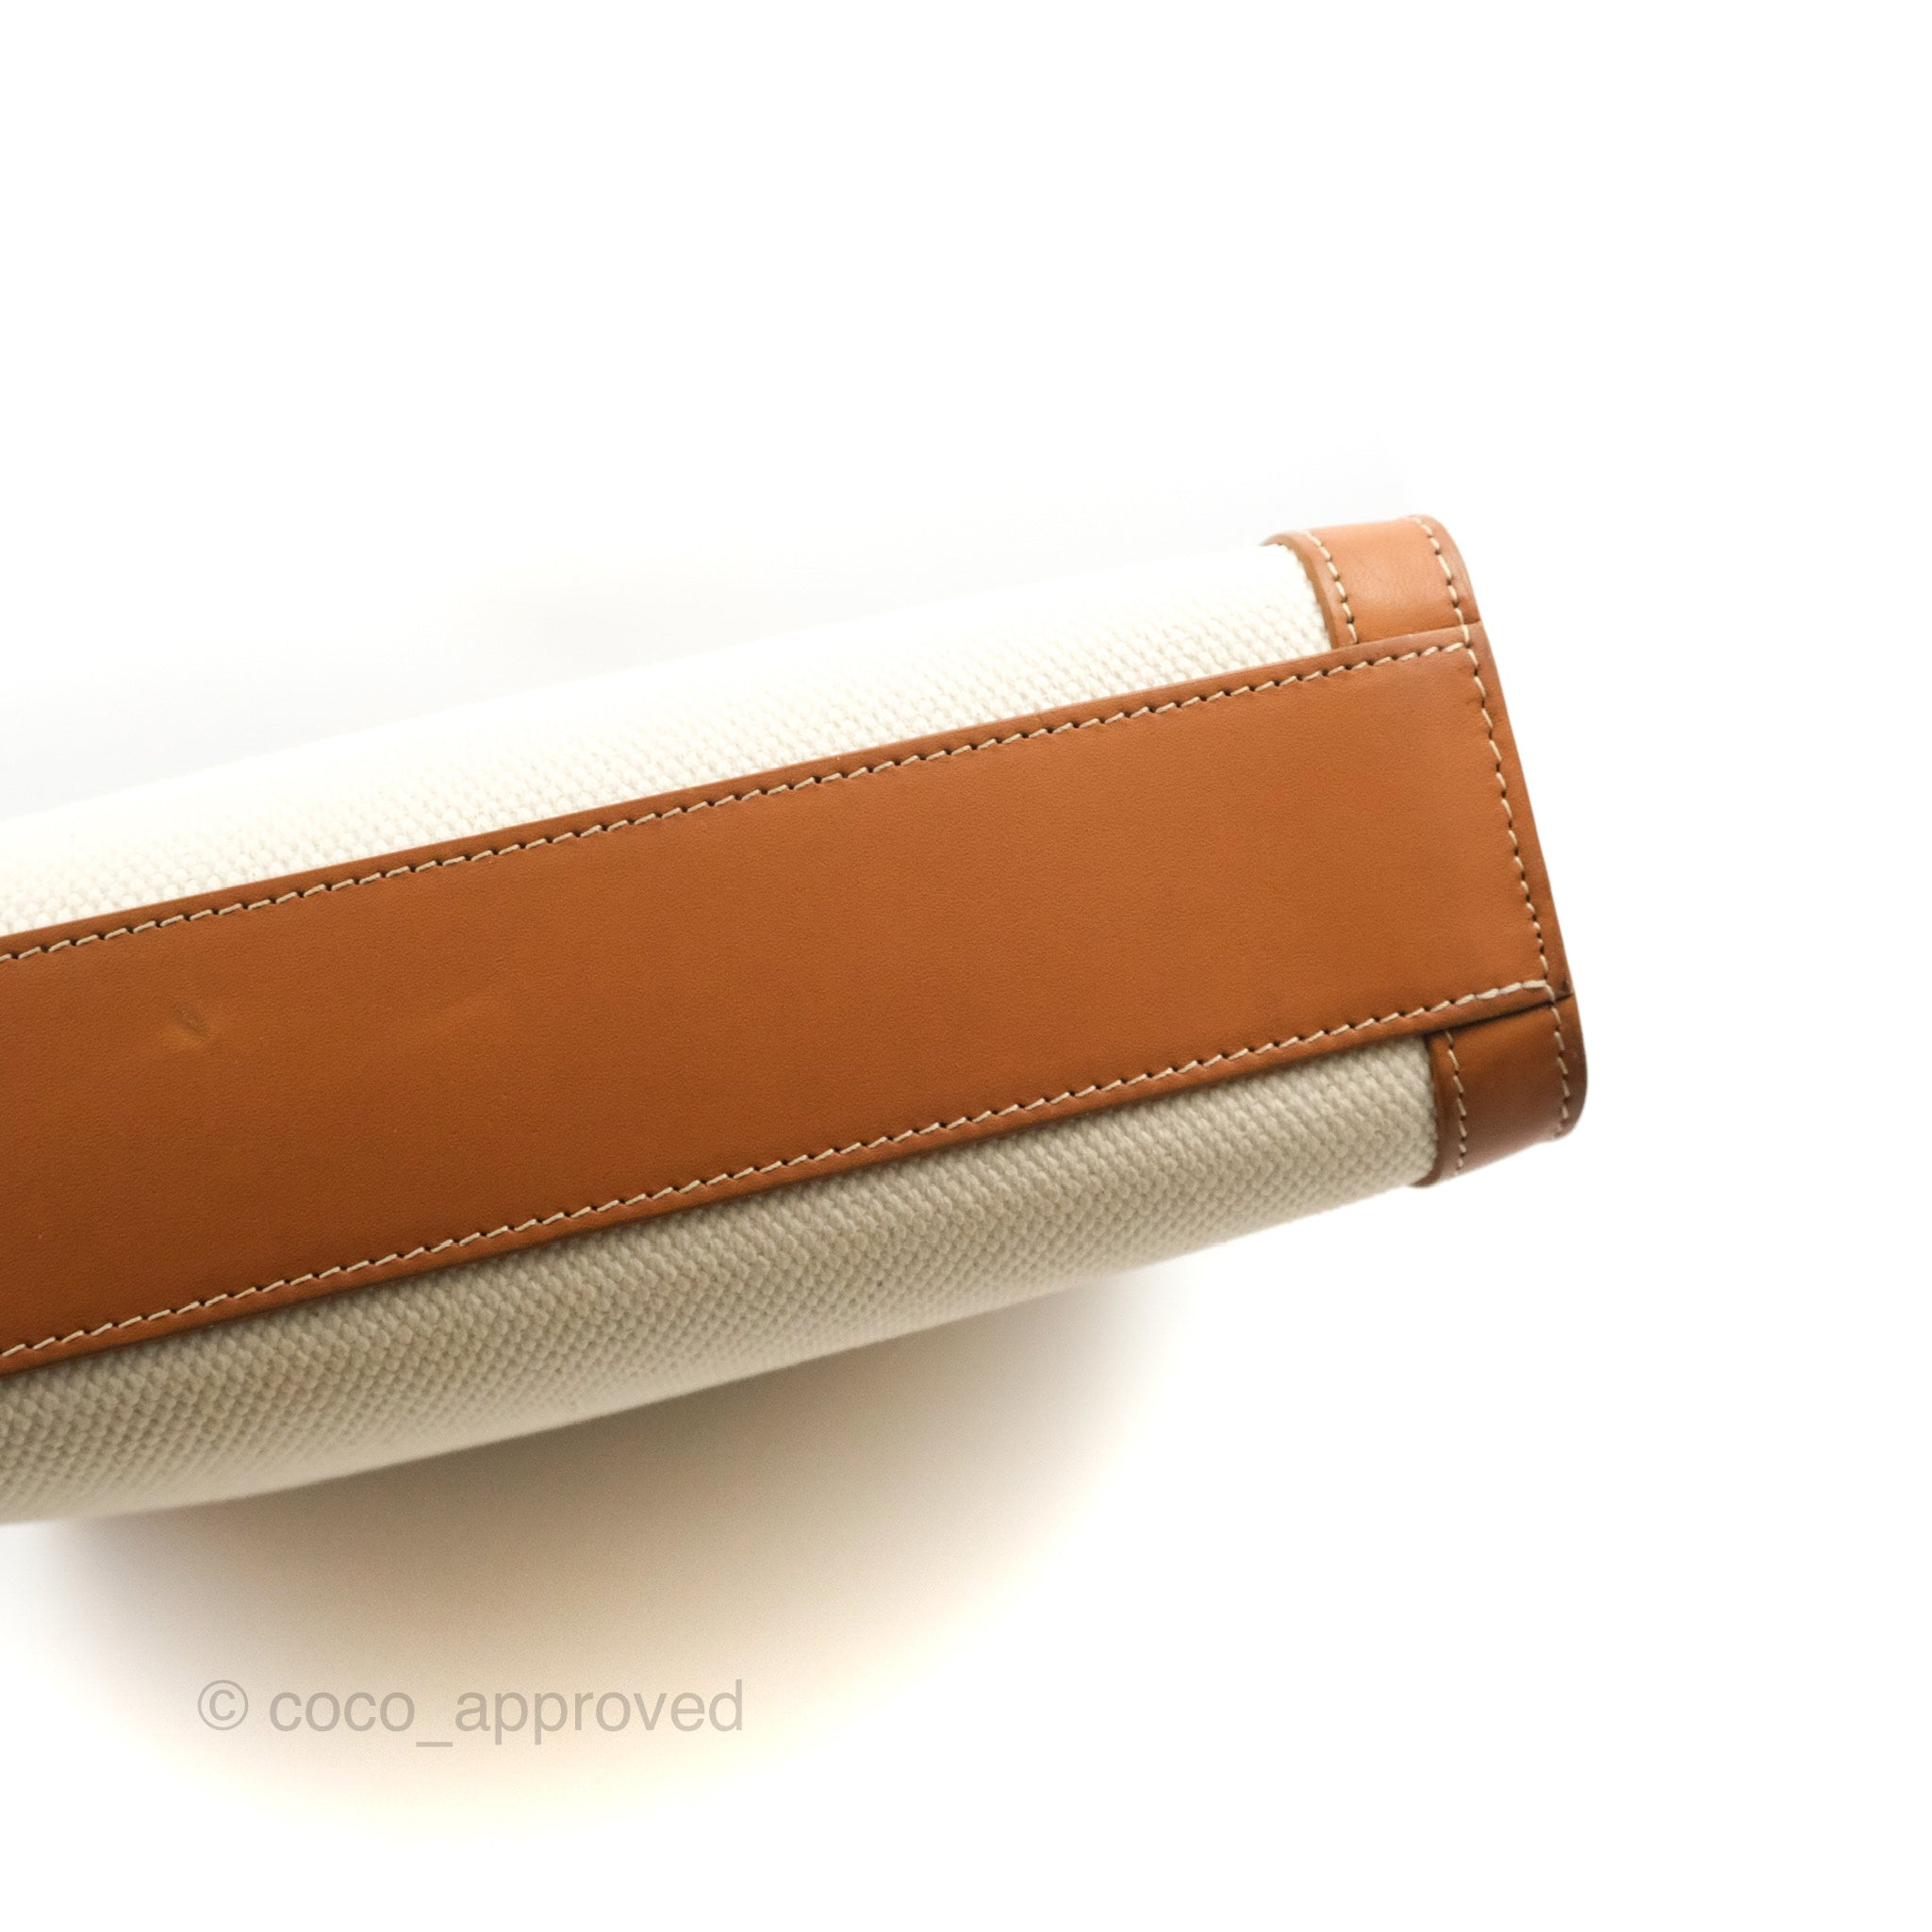 SMALL WALLET TRIOMPHE IN TEXTILE CELINE ALL OVER PRINT - NATURAL / TAN